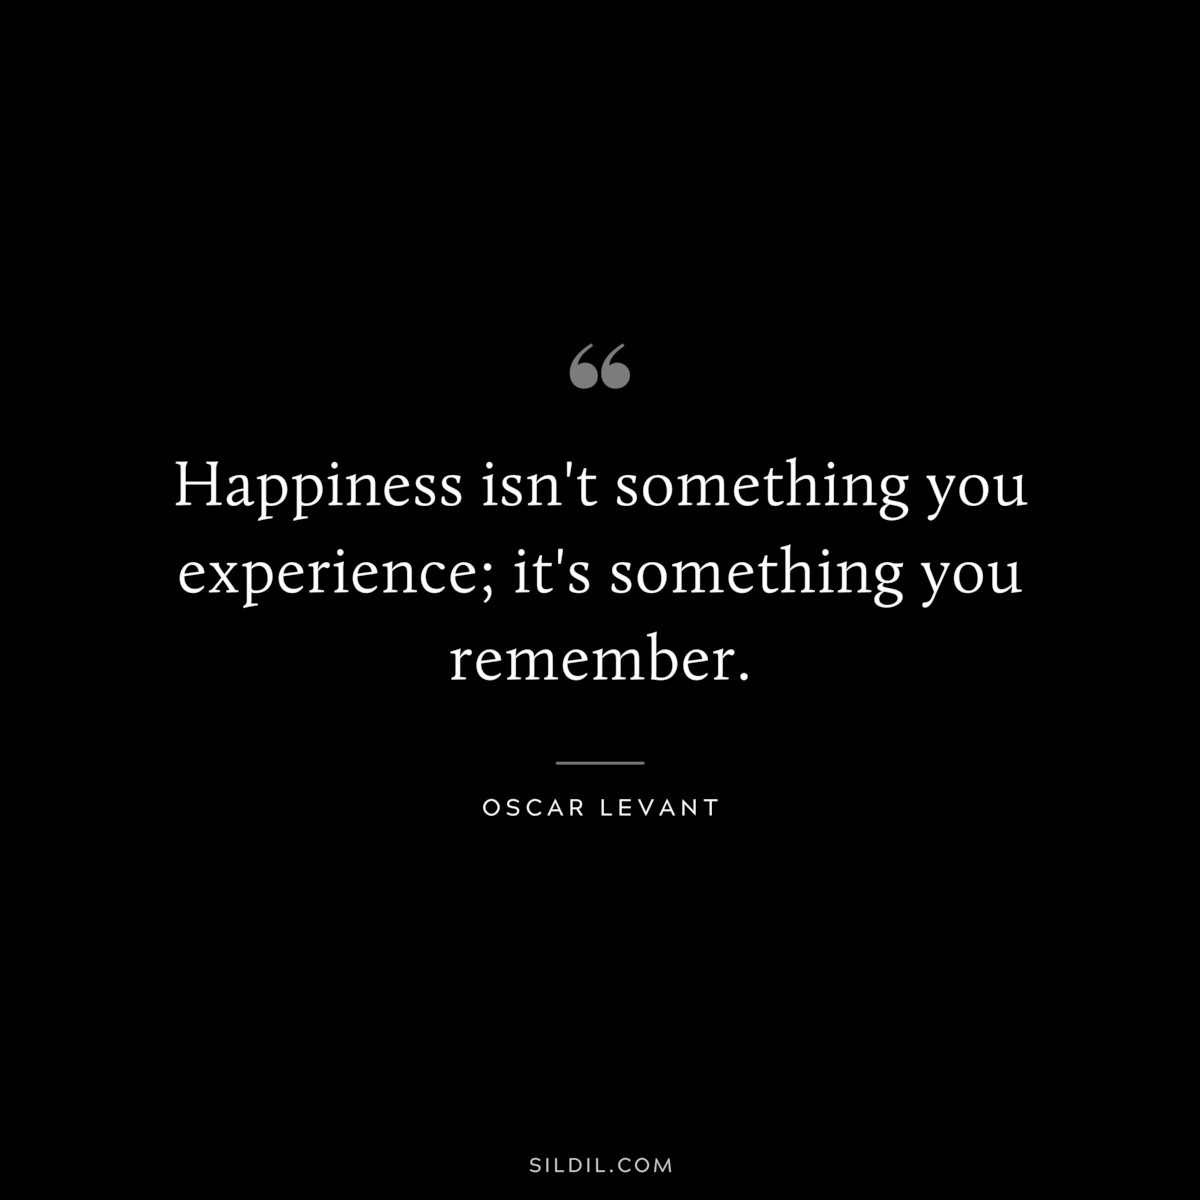 Happiness isn't something you experience; it's something you remember. ― Oscar Levant